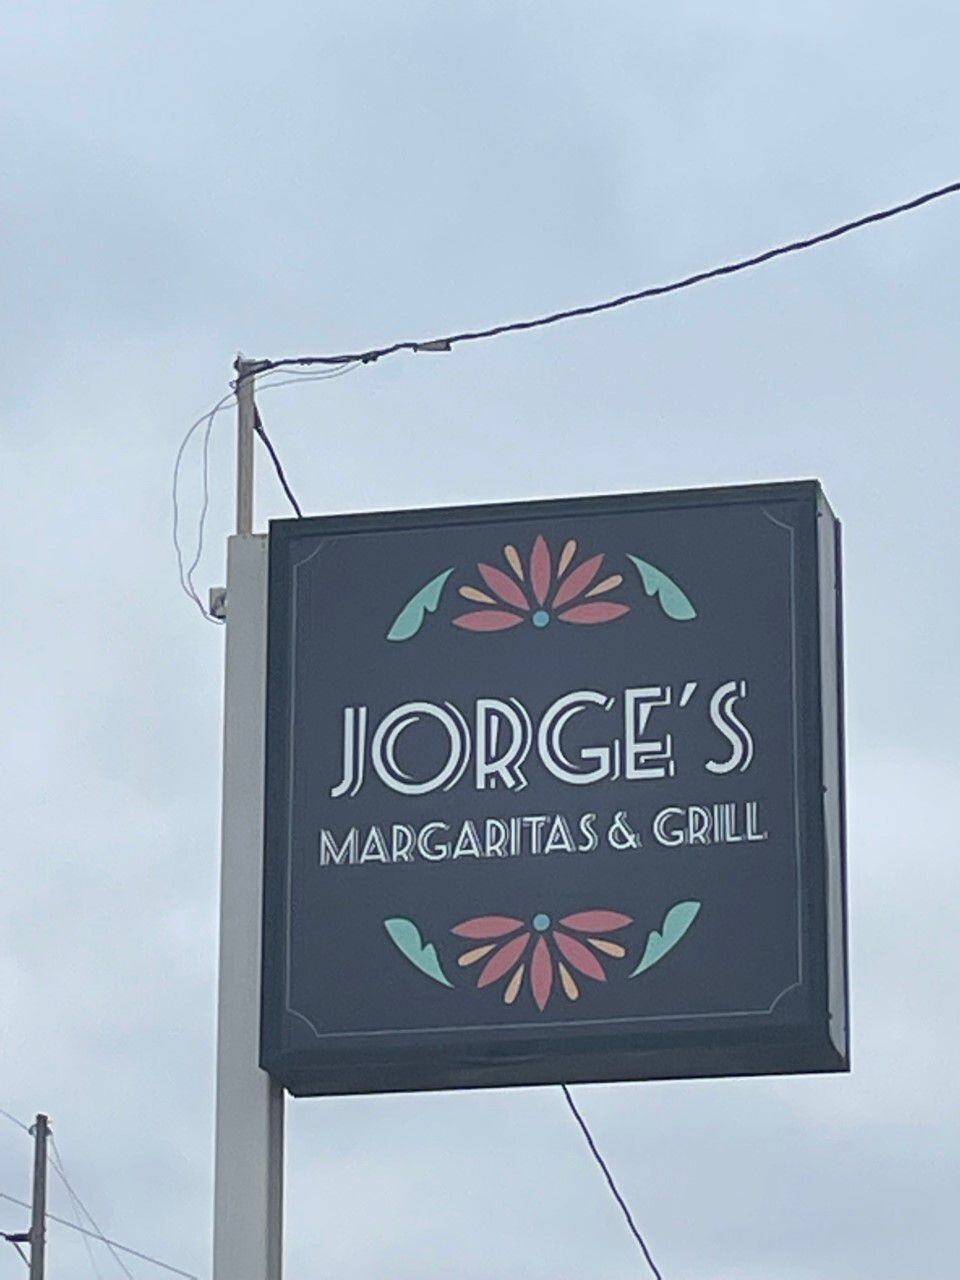 La Salle's competitive dining scene has added a new Mexican restaurant. Jorge's Margaritas & Grill has taken up residence in the former Monari's 101 Club and still offers local staples such as fried chicken, ribeye and pork tenderloin sandwiches in addition to Mexican cuisine.